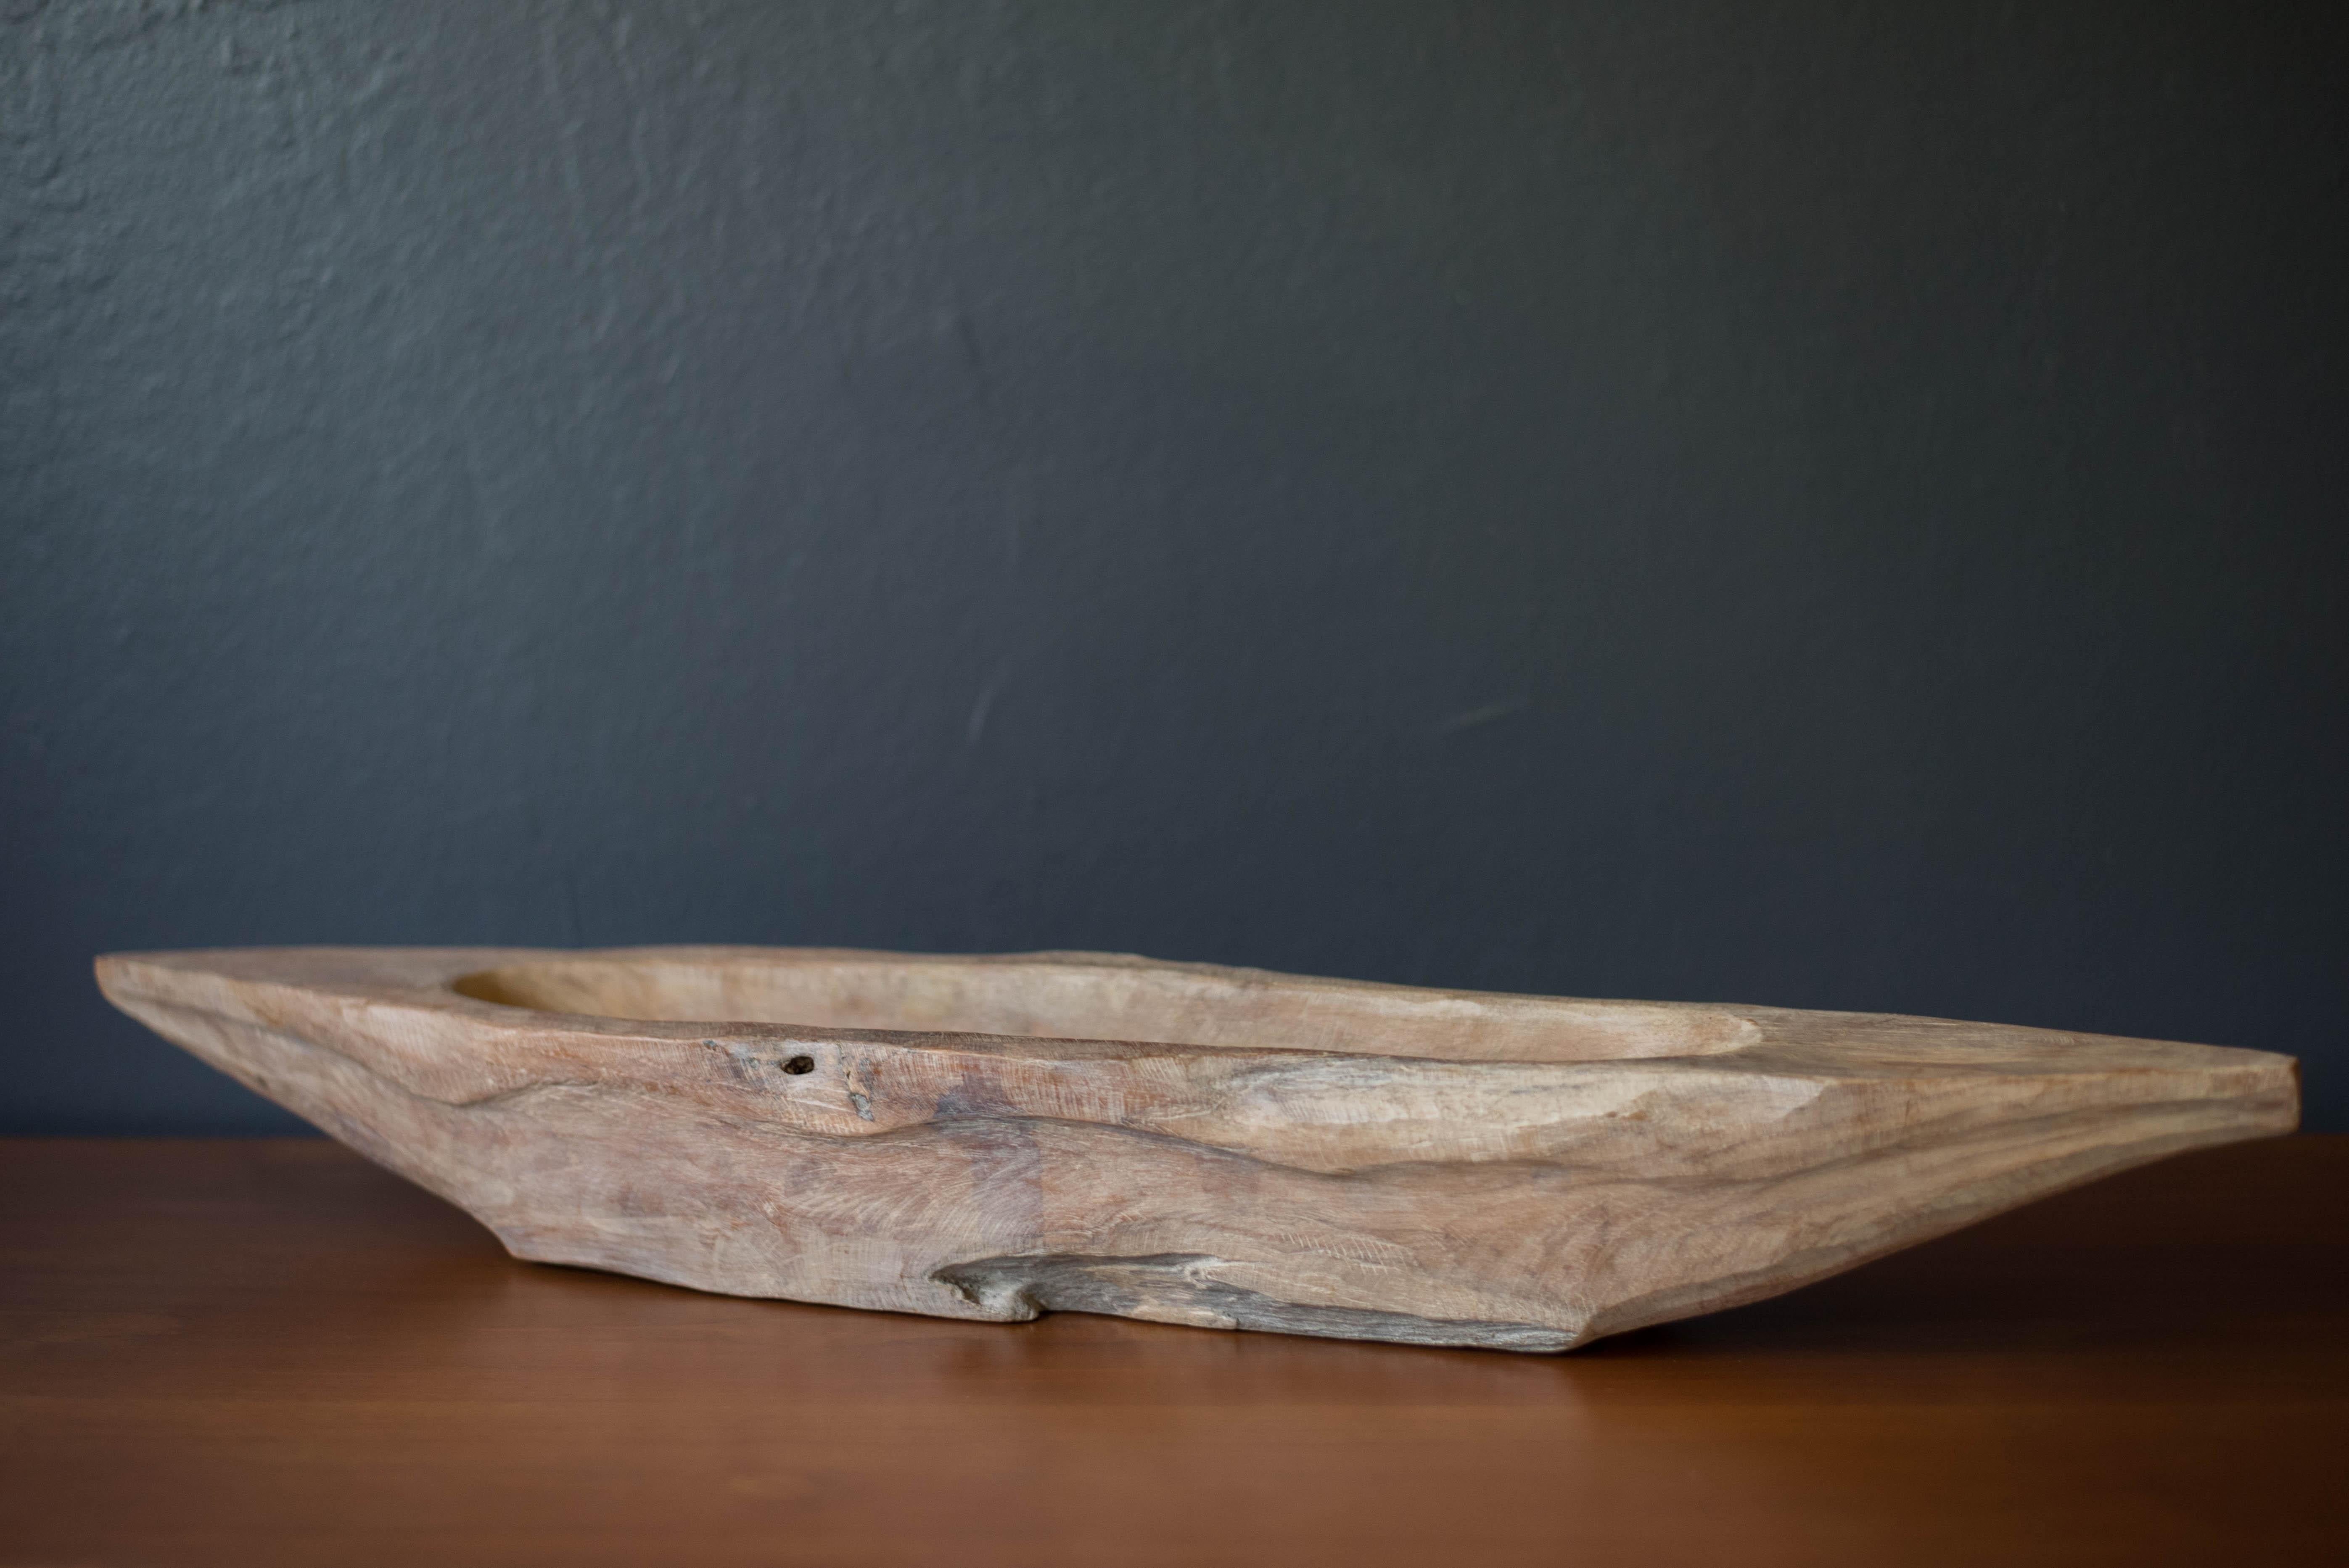 Vintage sculptural decorative centerpiece serving bowl circa 1970s. Crafted in a hand carved canoe shape that has been naturally aged displaying plenty of rustic charm and patina. The perfect home decor piece that can be accessorized with fruit,